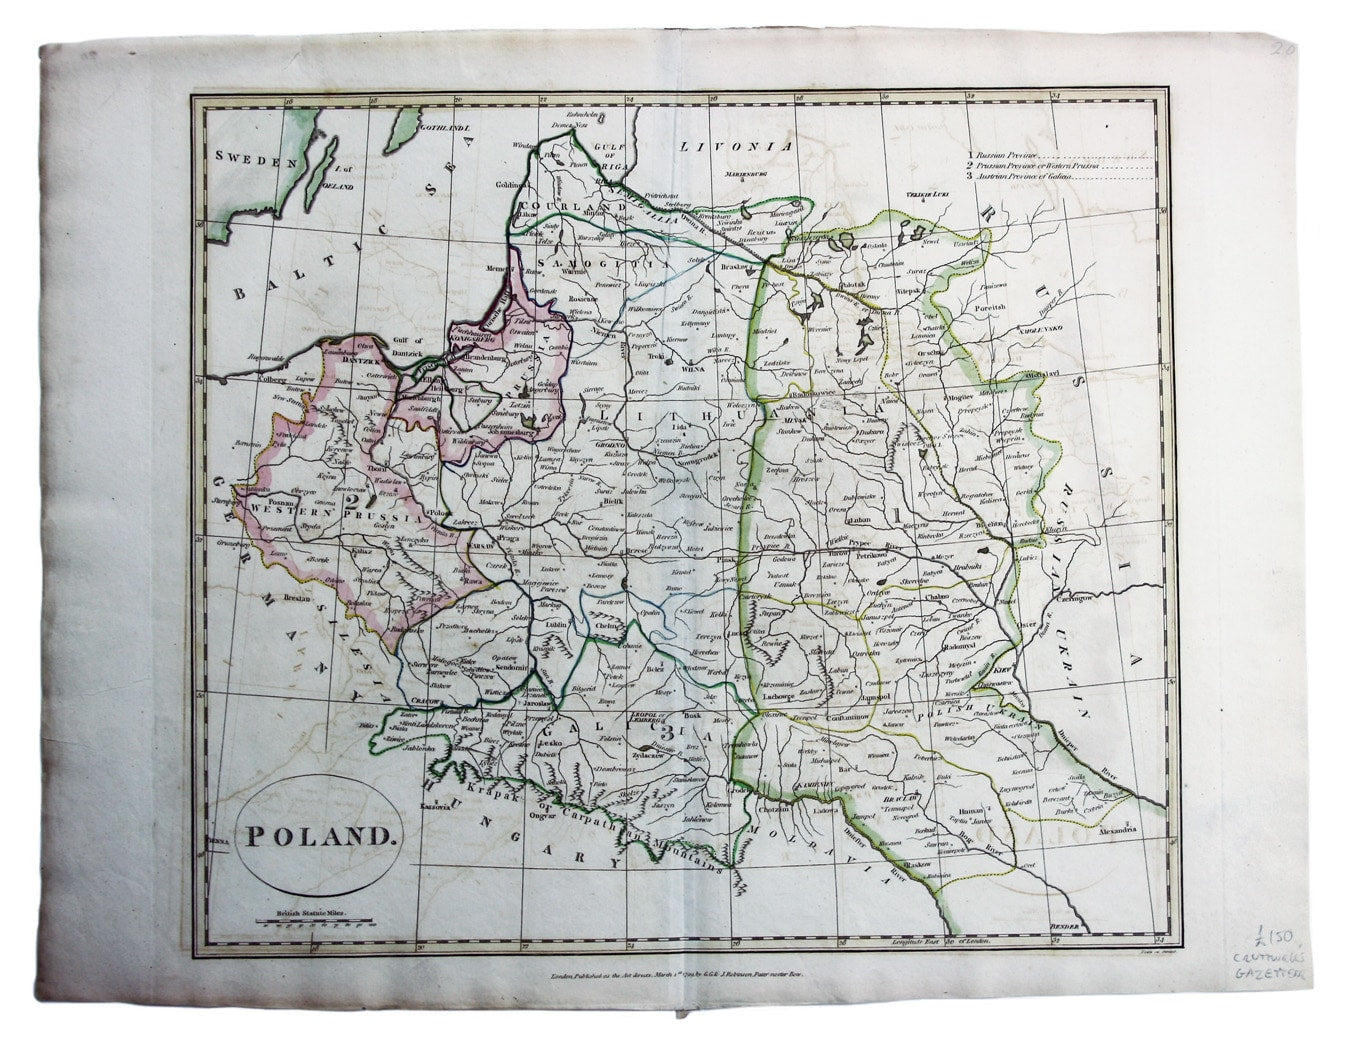 Cruttwell’s Map of Poland